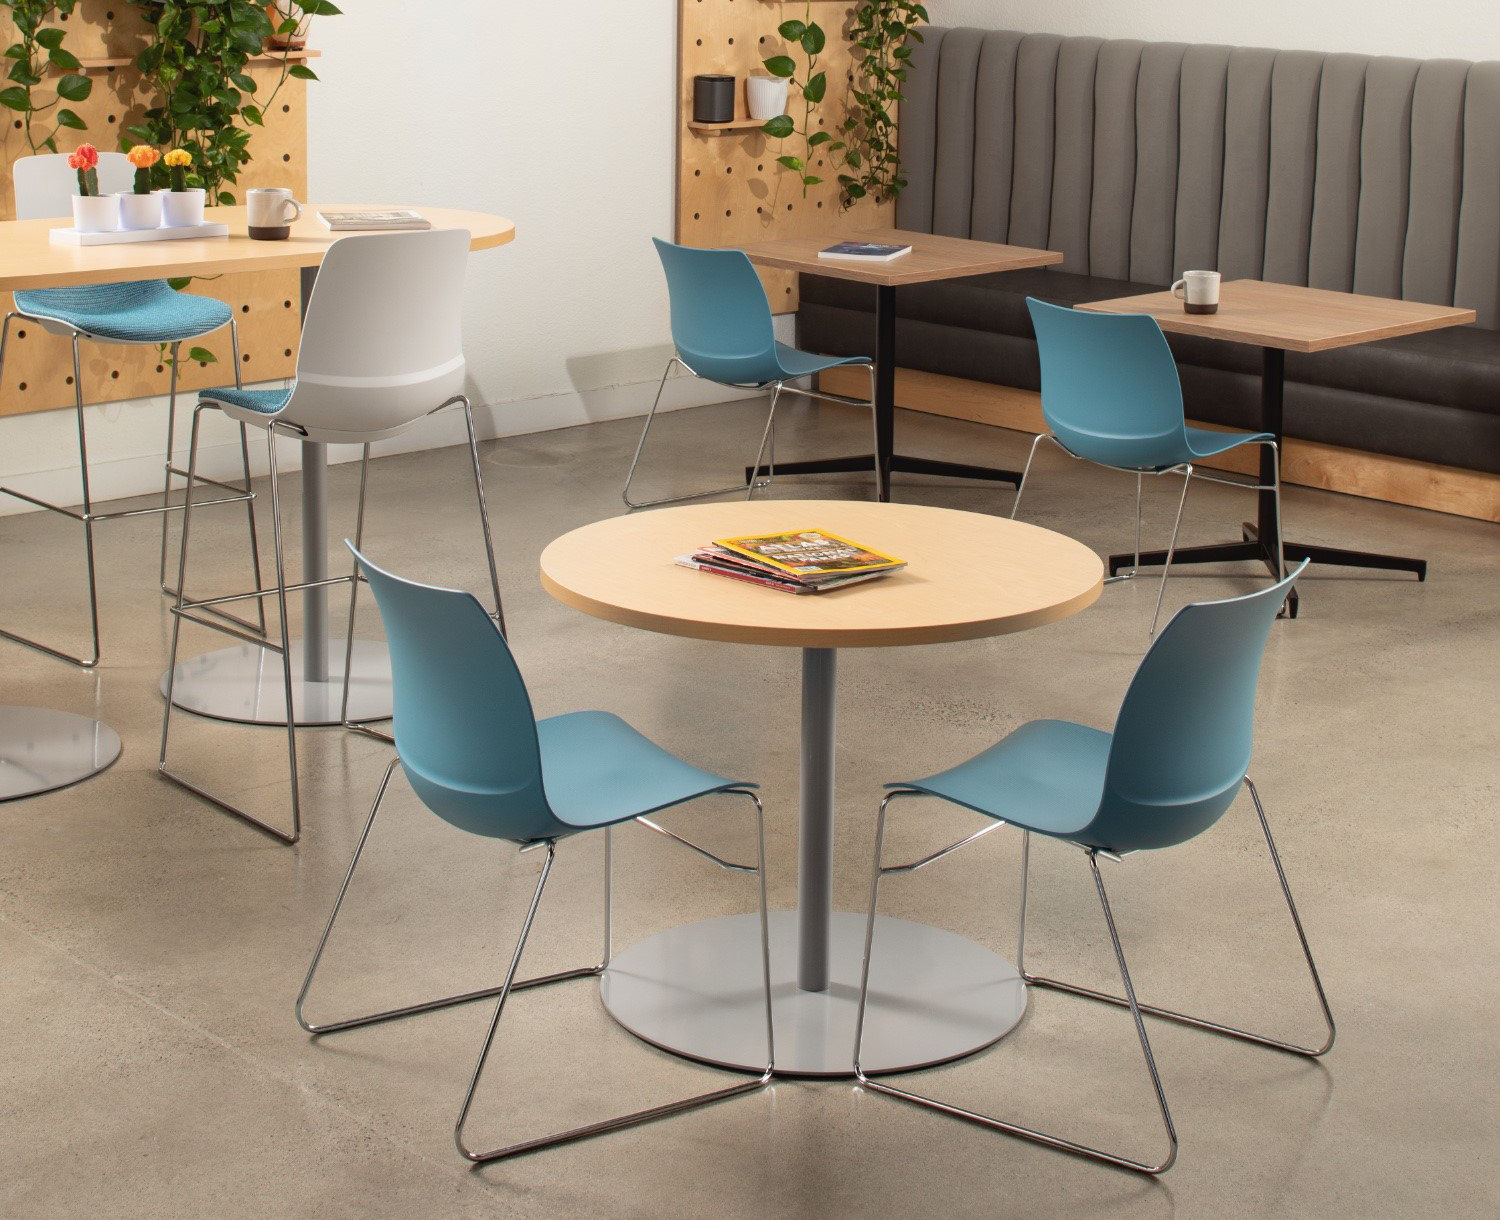 SitOnIt Seating releases Parallon, a line of tables